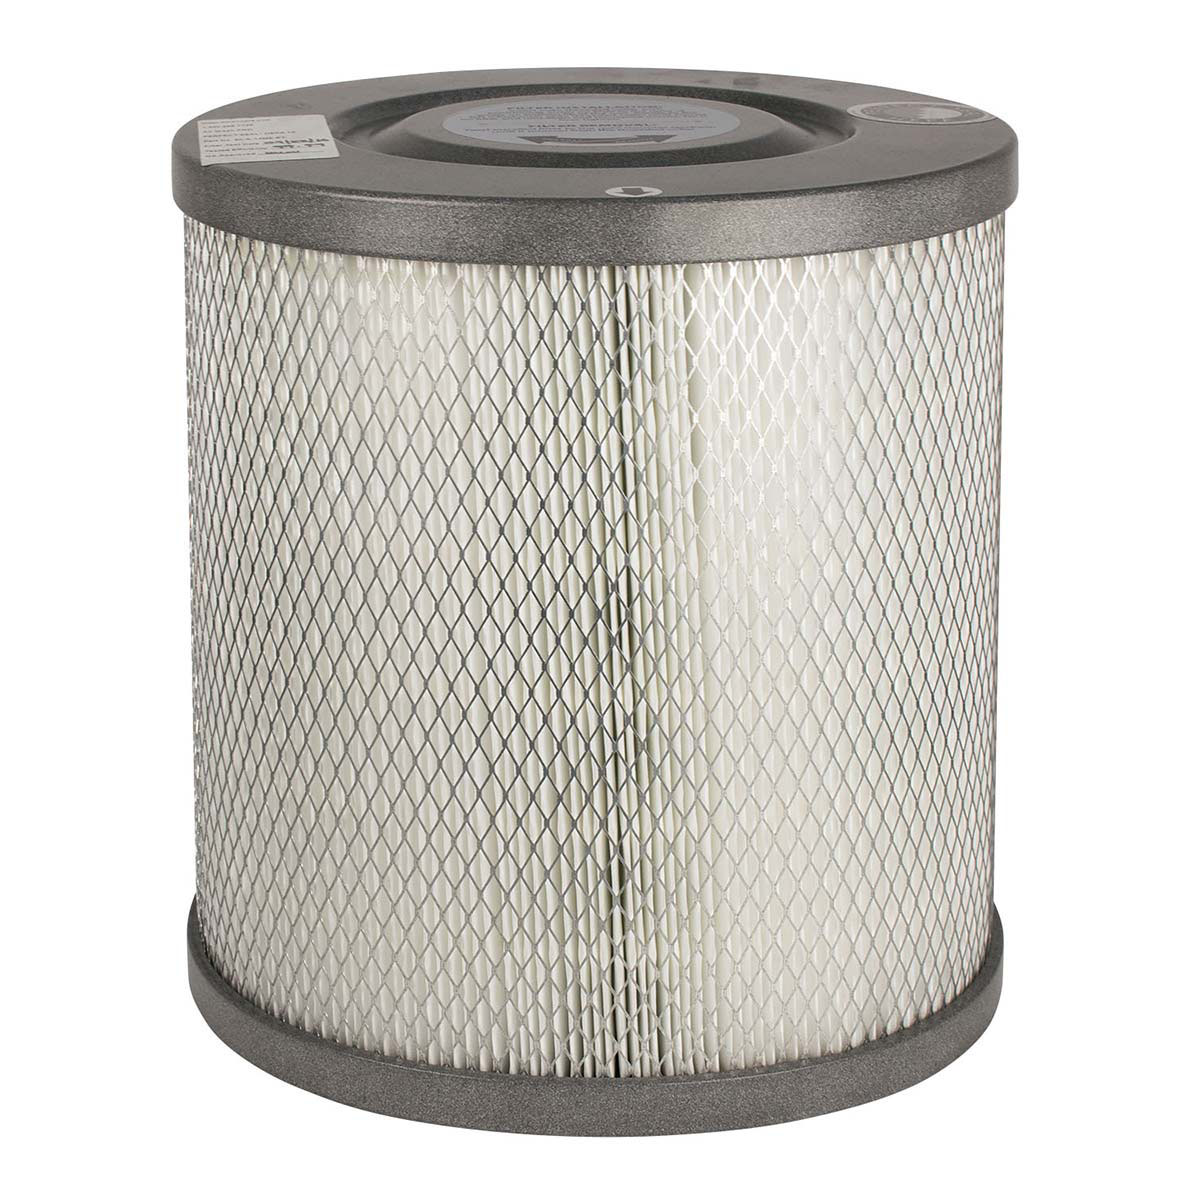 NorAir 800 3rd Stage HEPA Filter Canister 14"